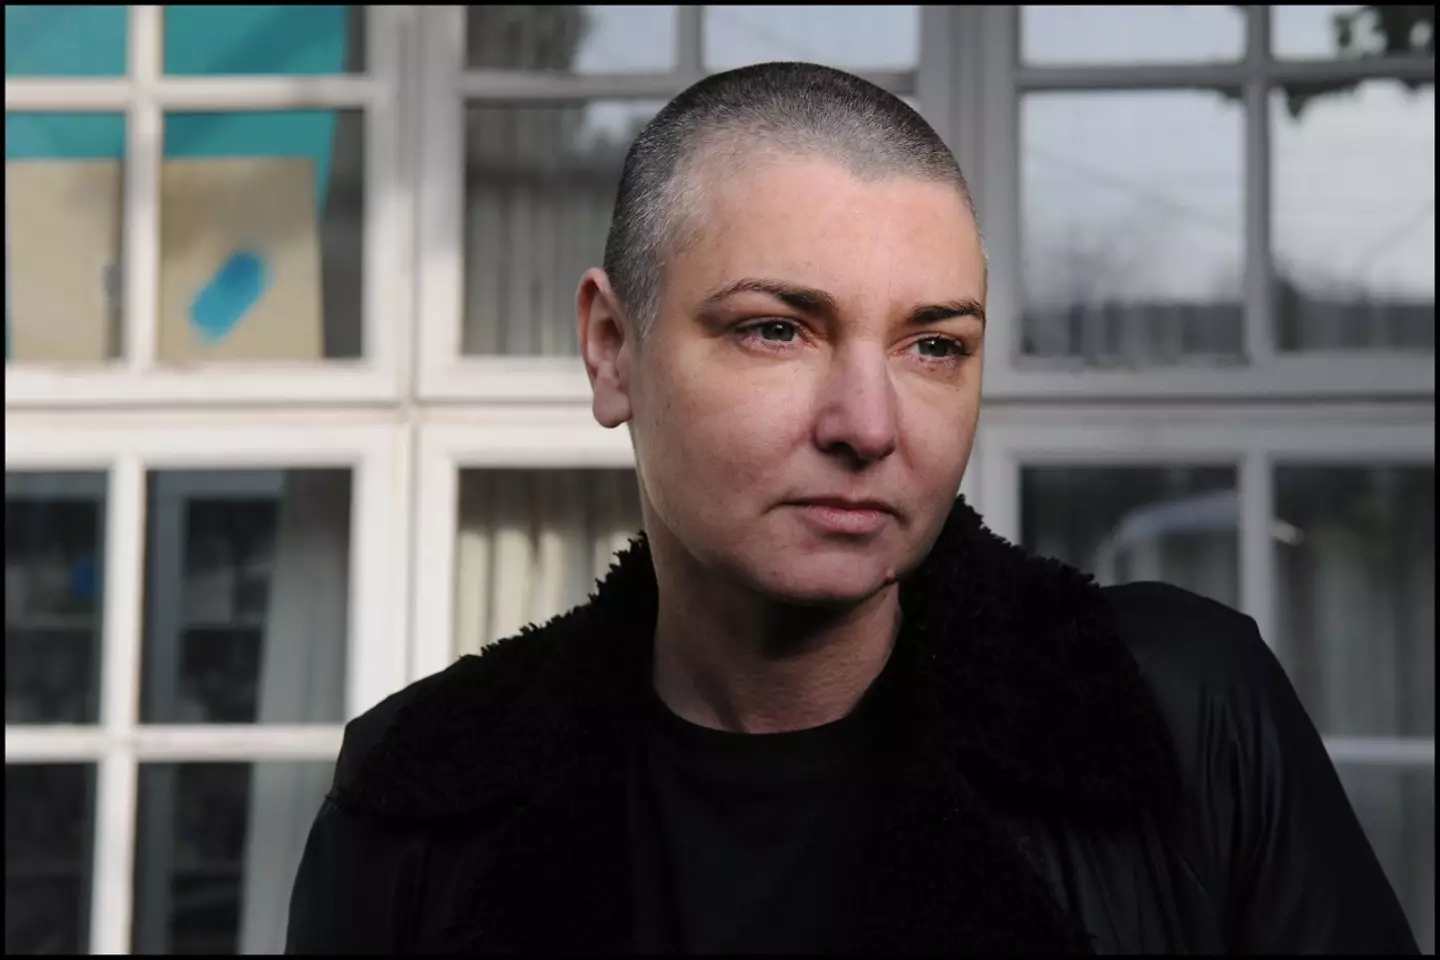 Irish singer Sinéad O'Connor died at the age of 56, her family announced.